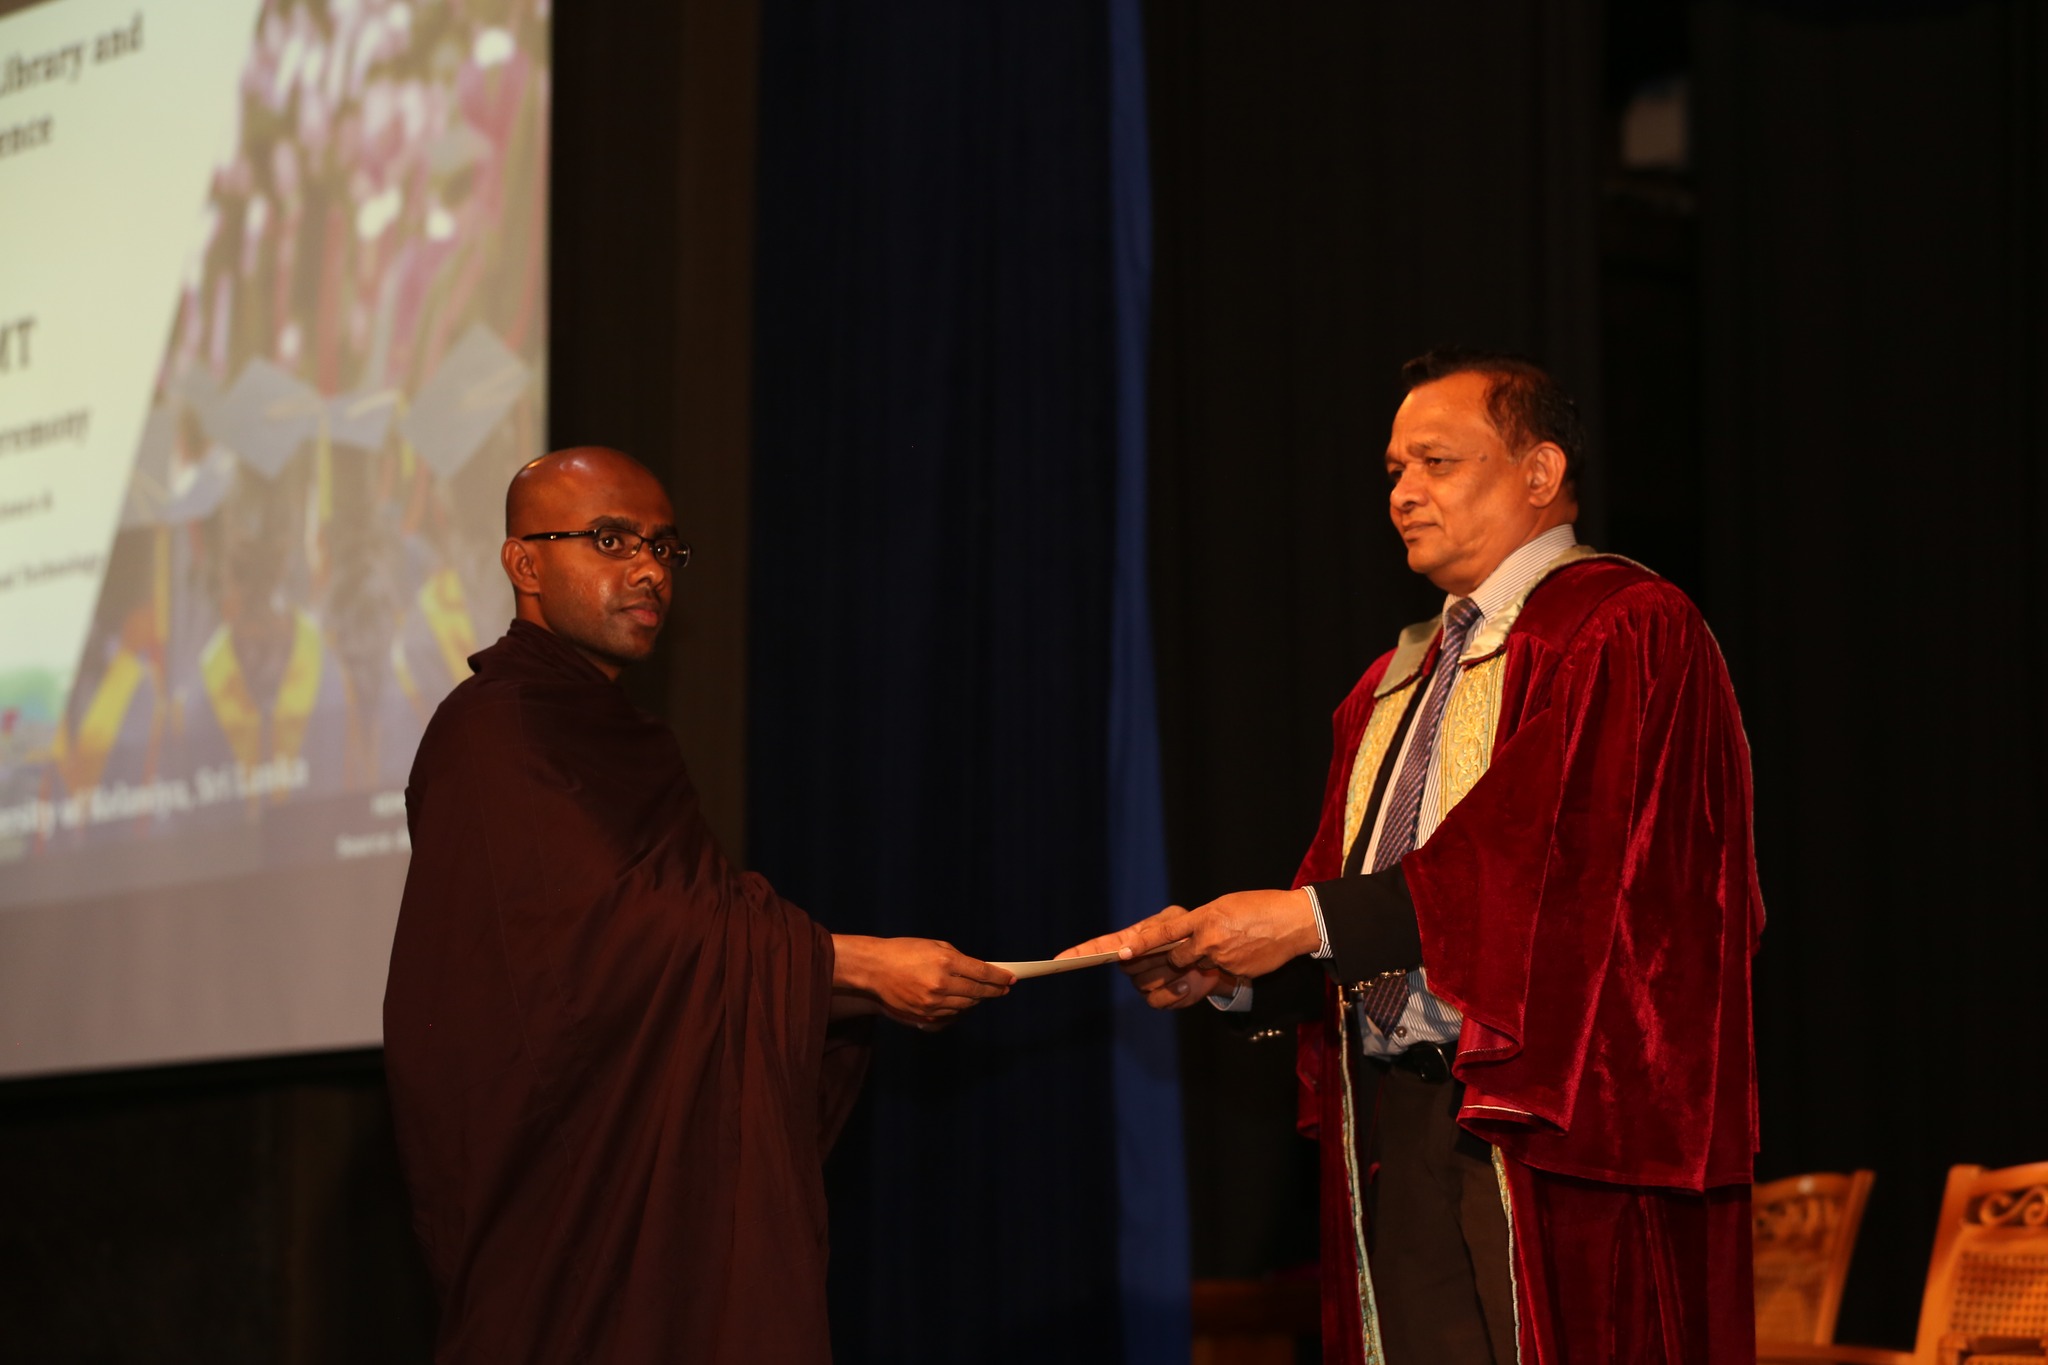 The Diploma Awarding Ceremony of the Diploma in Library and Information Science and Diploma in Information Management and Technology